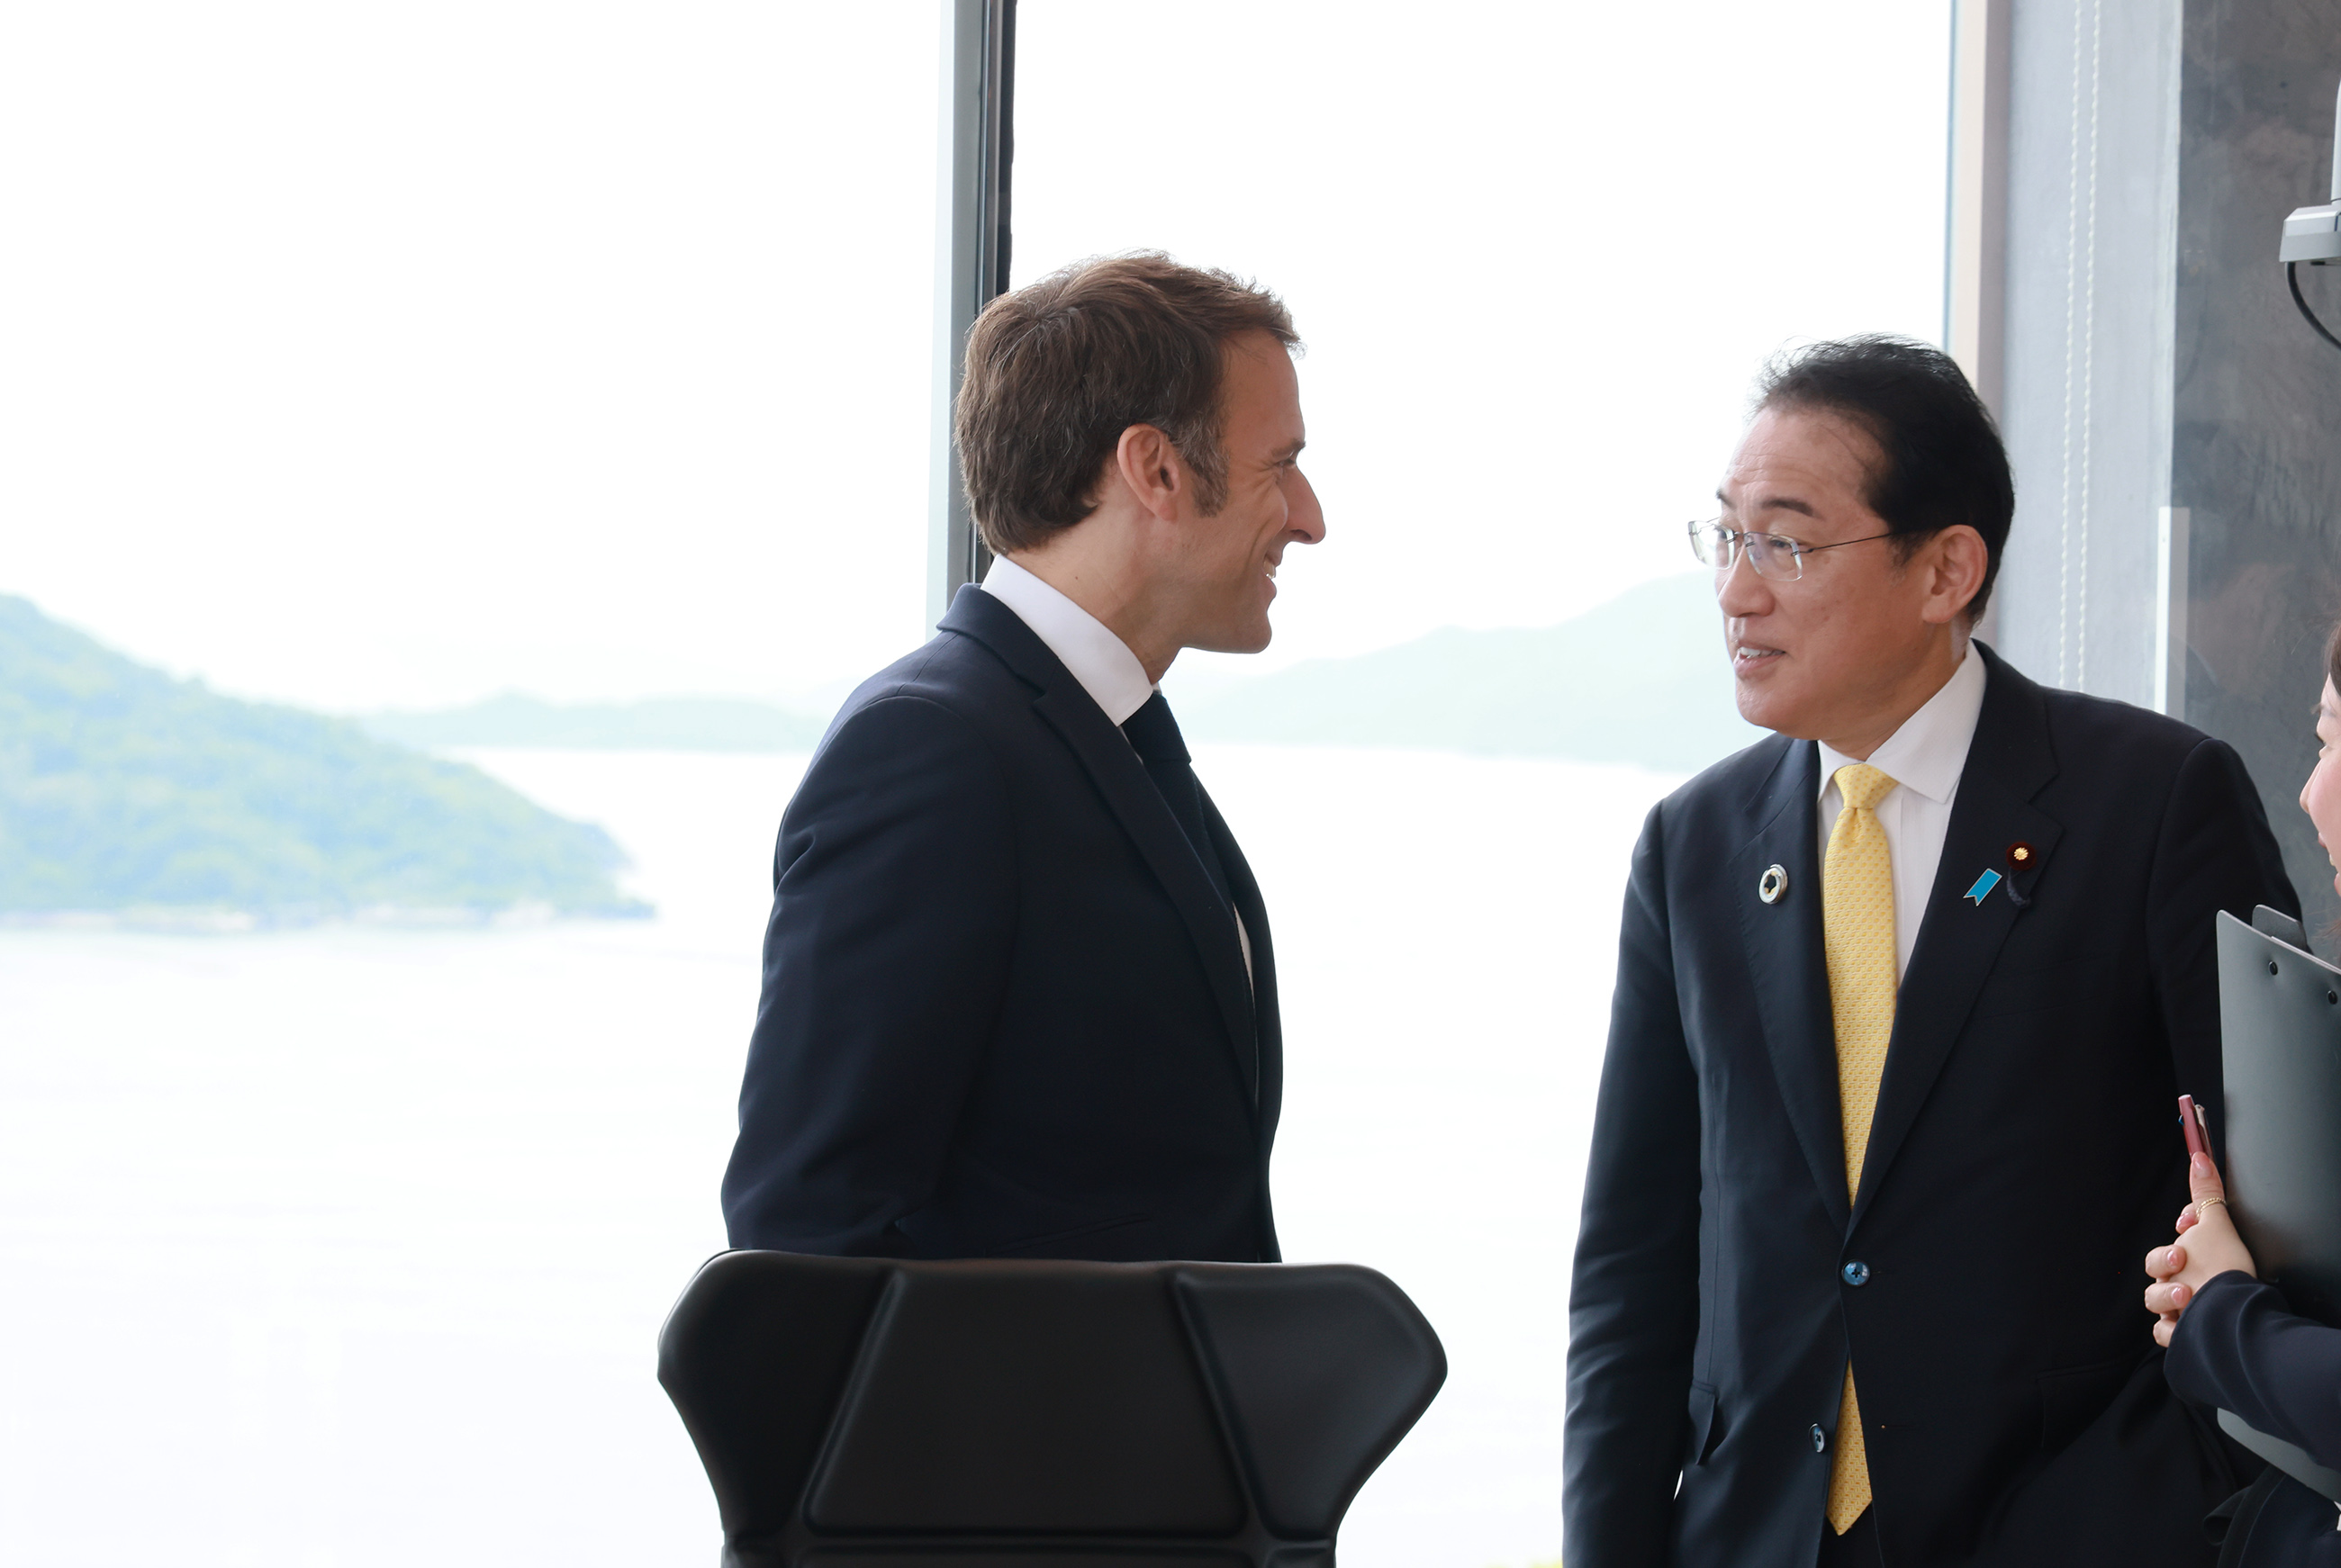 Prime Minister Kishida interacting with other leaders (4)